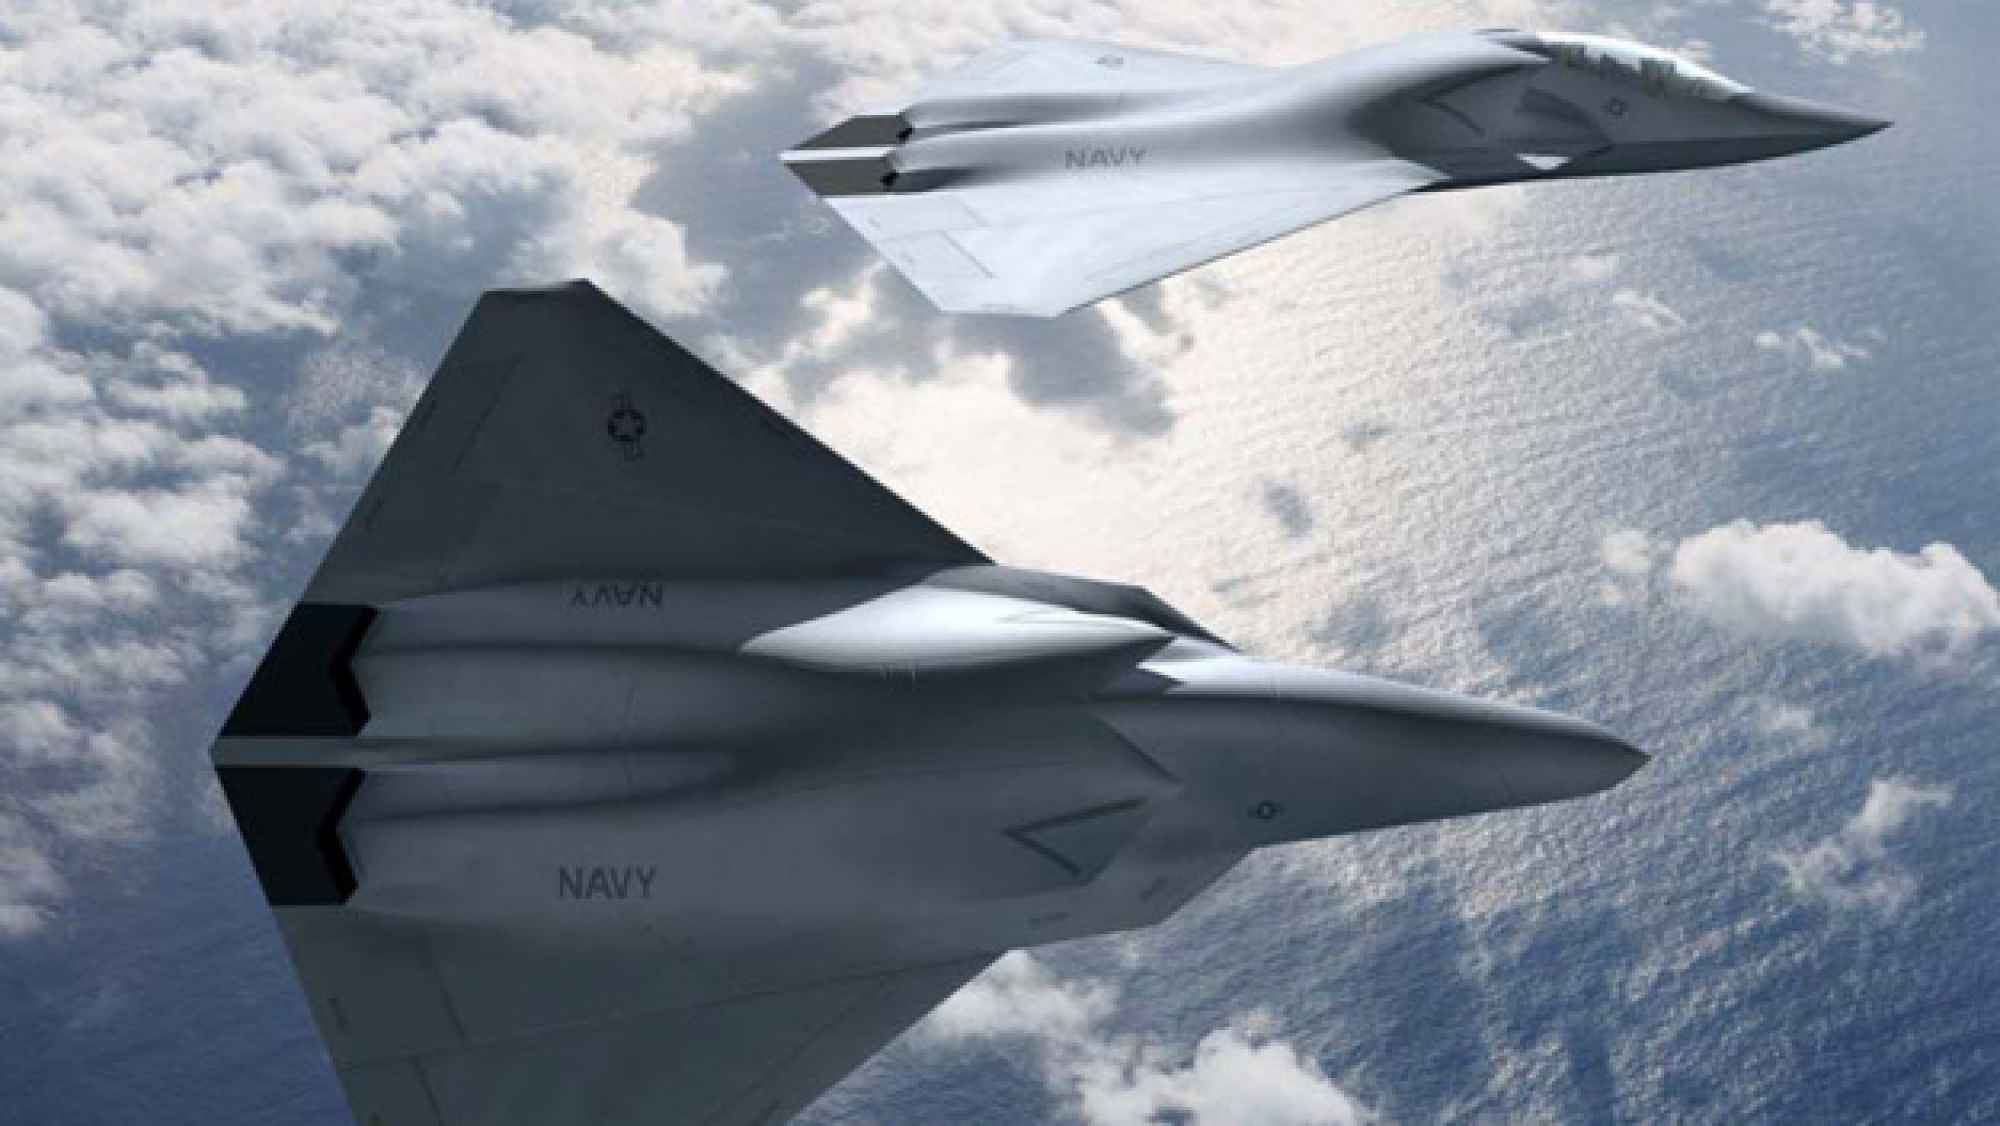 Speed and range could be key for Navy's next fighter jet